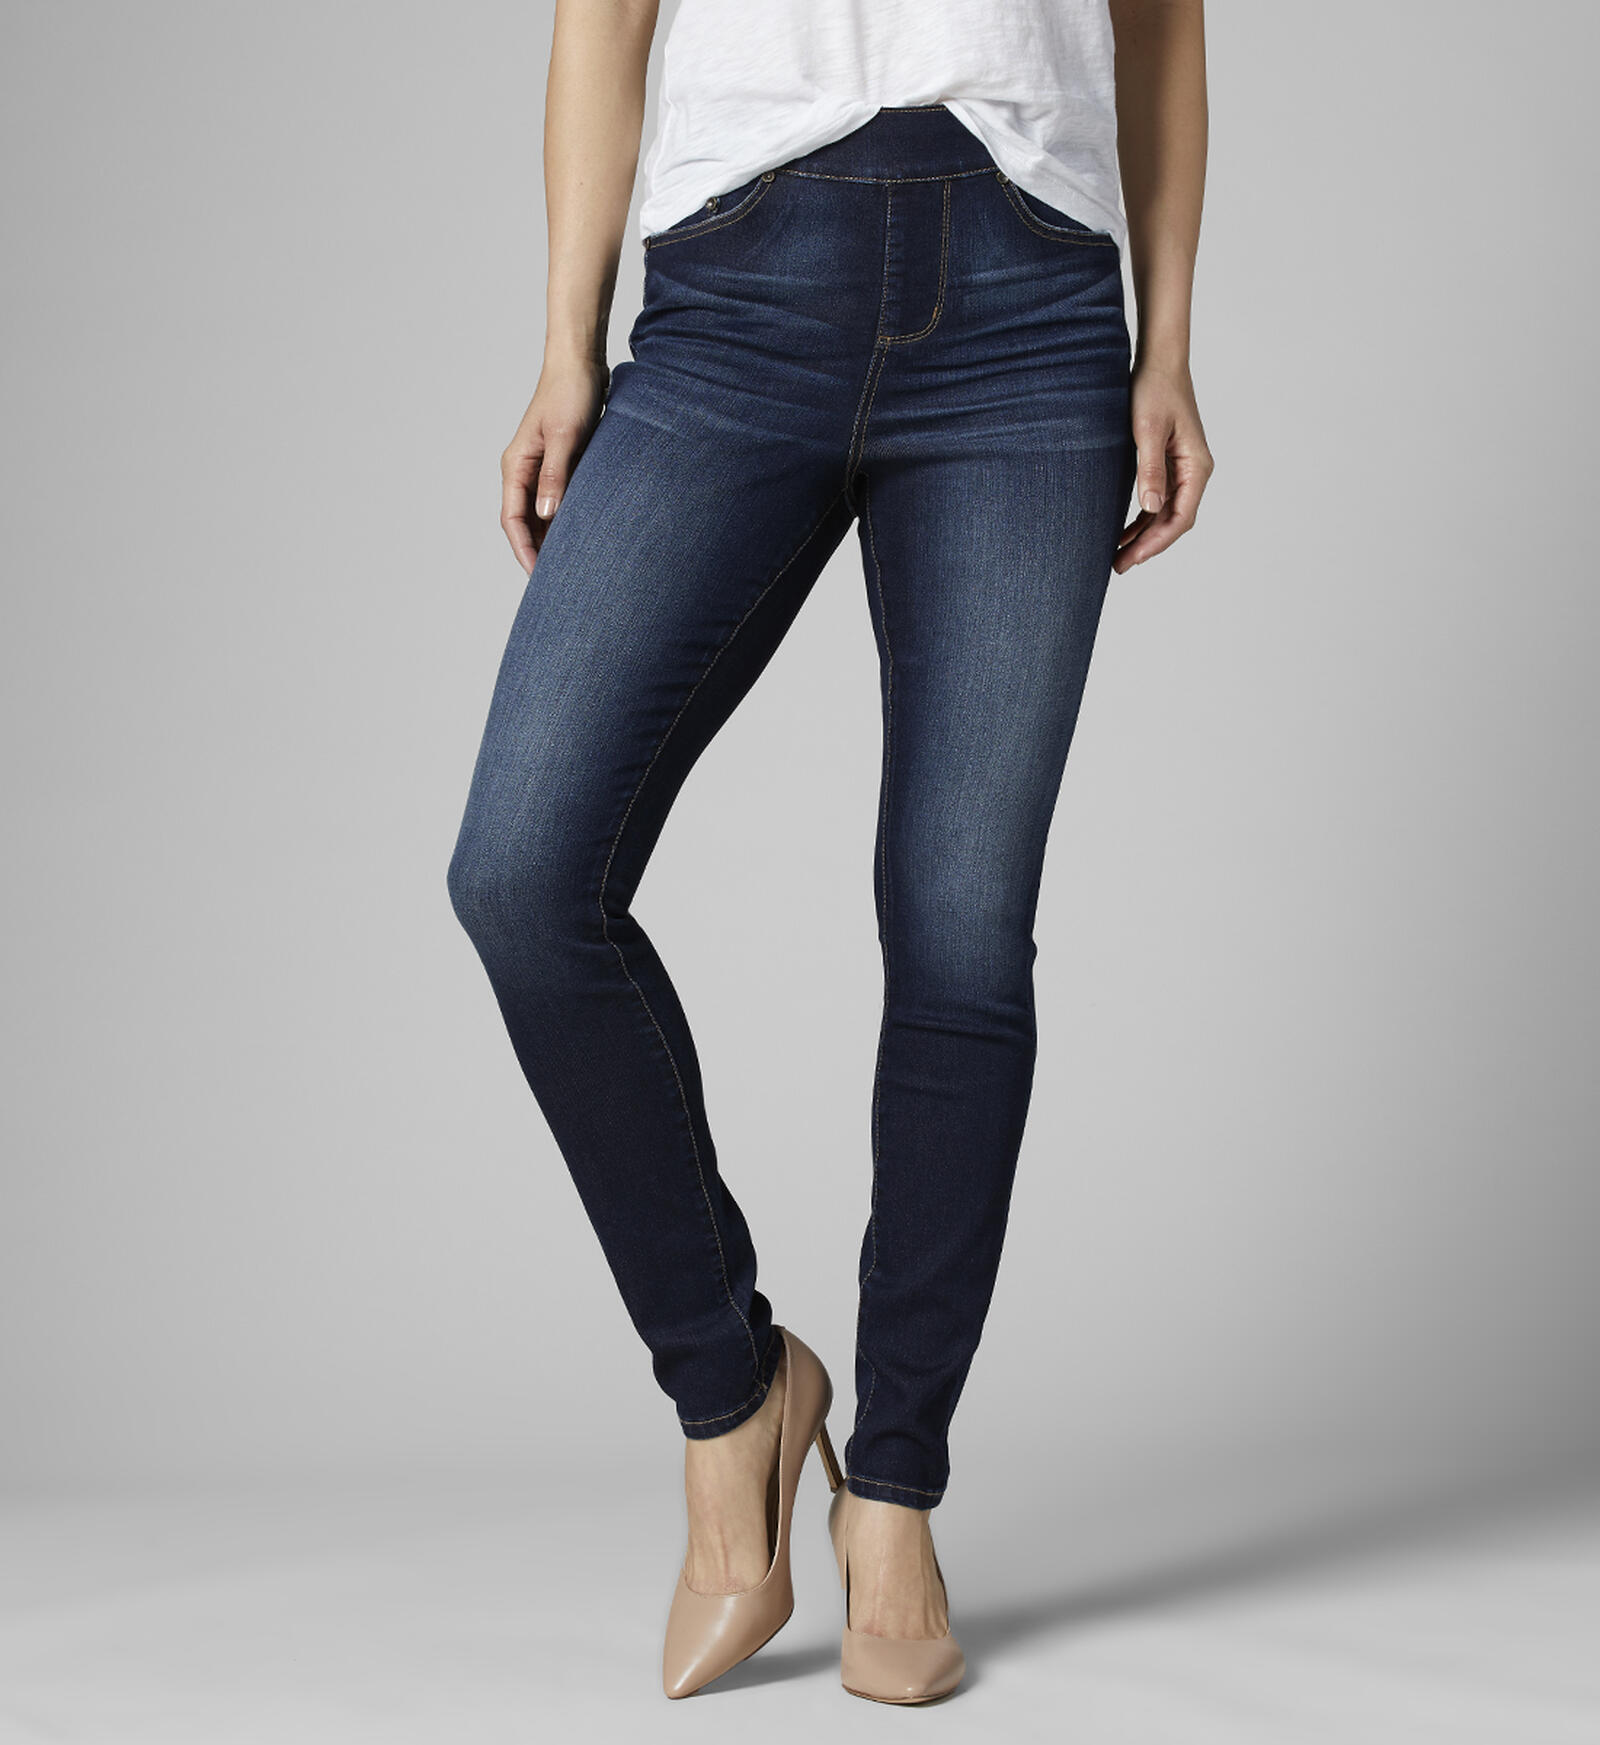 Buy Maya High Rise Skinny Jeans for USD  | Jag Jeans US New